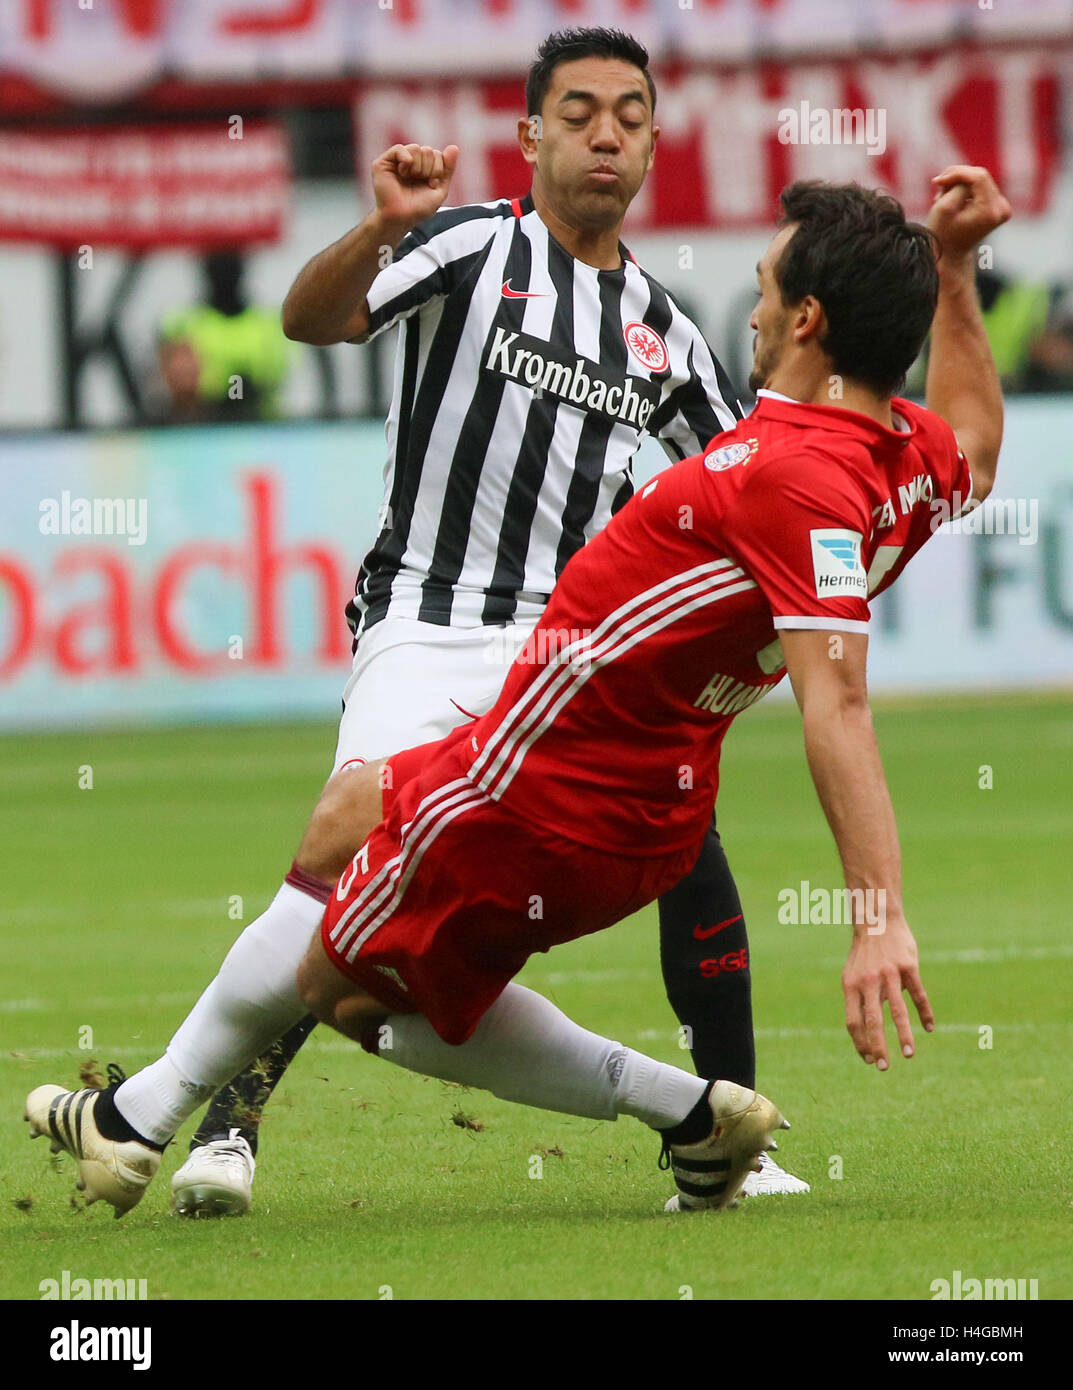 Frankfurt's Marco Fabian (l) in a duel against Munich's Mats Hummels (r) during the match between Eintracht Frankfurt and Bavaria Munich on the seventh match day of the German Bundesliga at Commerzbank-Arena in Frankfurt on the Main, Germany, 15 October 2016. PHOTO: FRANK RUMPENHORST/dpa Stock Photo